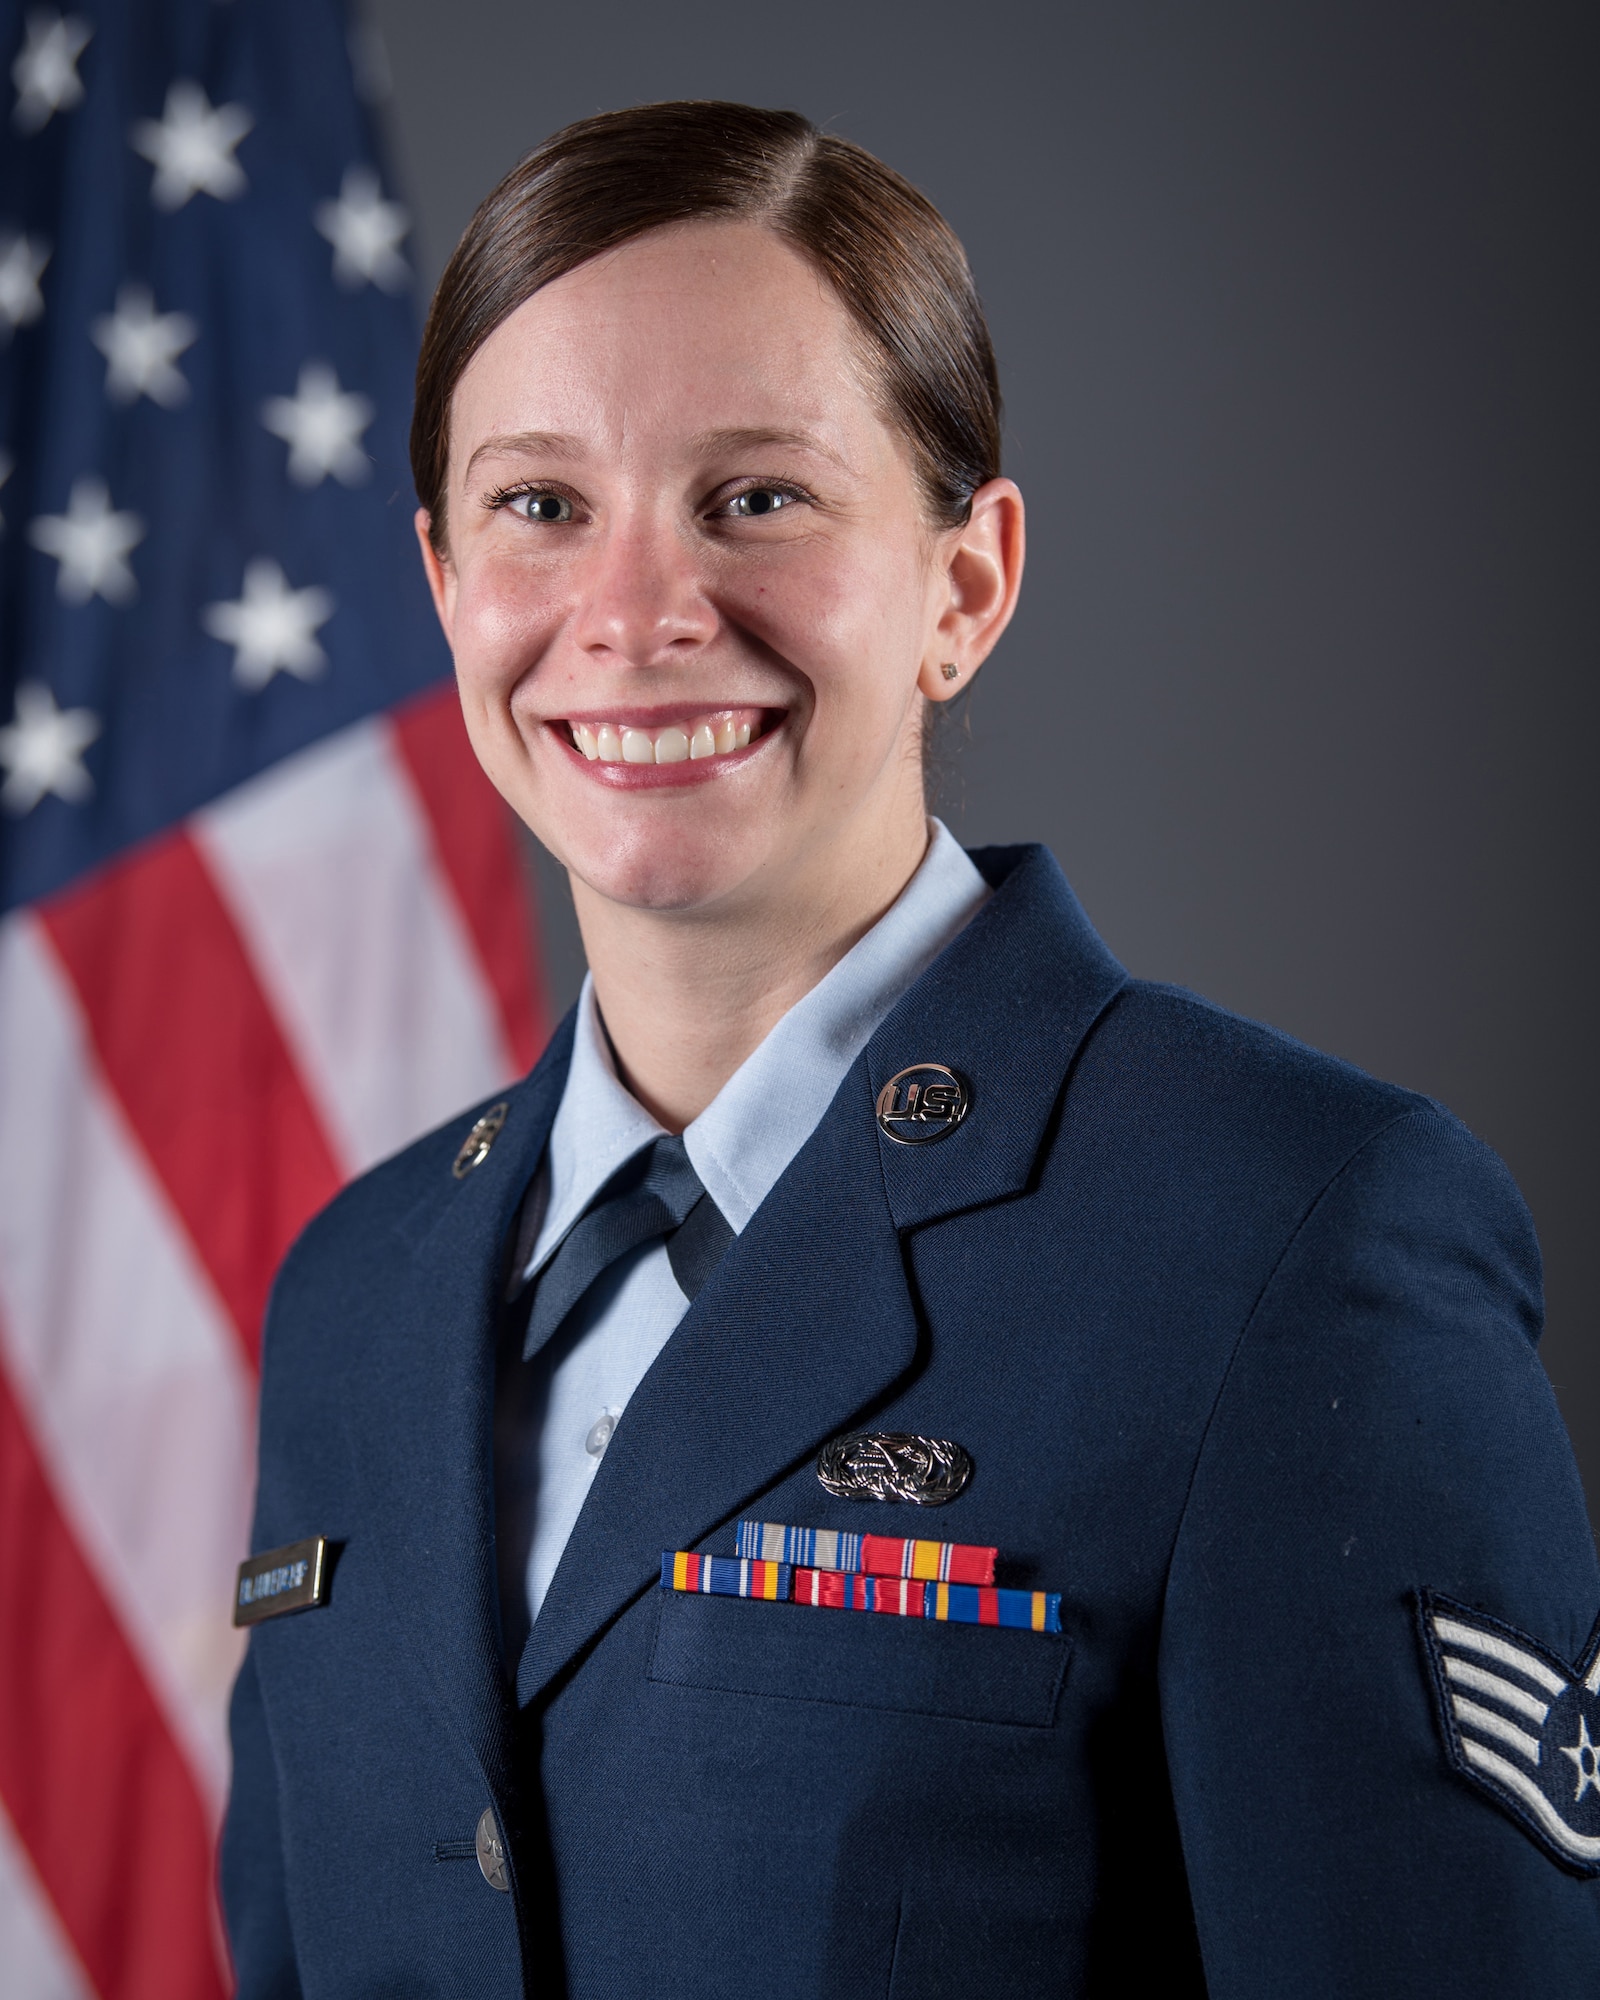 Staff Sgt. Danielle Blankenship is the Kentucky Air National Guard's 2019 Airman of the Year in the NCO category. While mobilized last year, she was hand-selected as the top enlisted member of an expeditionary Readiness Action Team that redeployed 4,500 troops with zero errors. She also single-handedly created a new format for the management of force deployment data, reducing rejection rates 15 percent below the average for units across U.S. Air Forces Central Command. (U.S. Air National Guard photo by Master Sgt. Philip Speck)